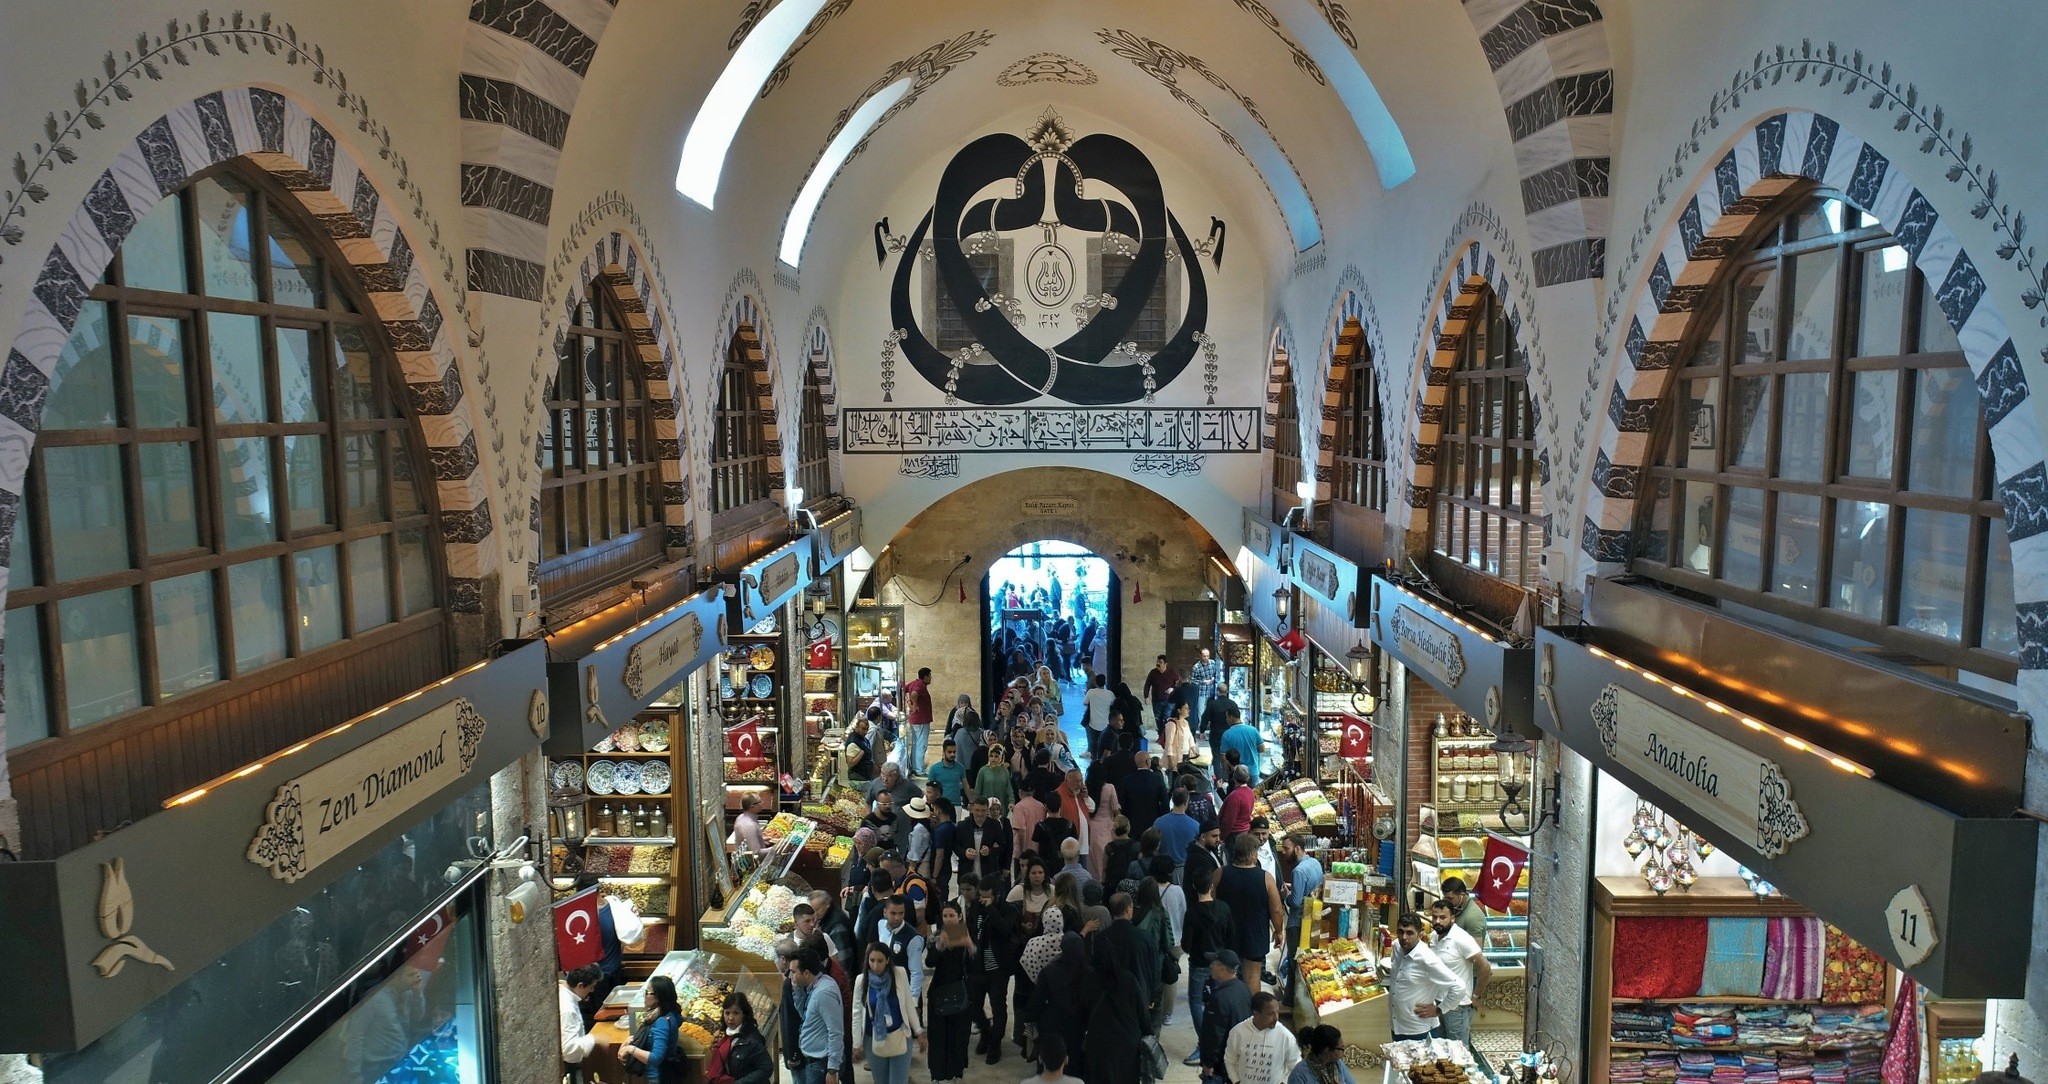 Spice Bazaar, a busy marketplace popular among tourists, has been under restoration since 2013. 